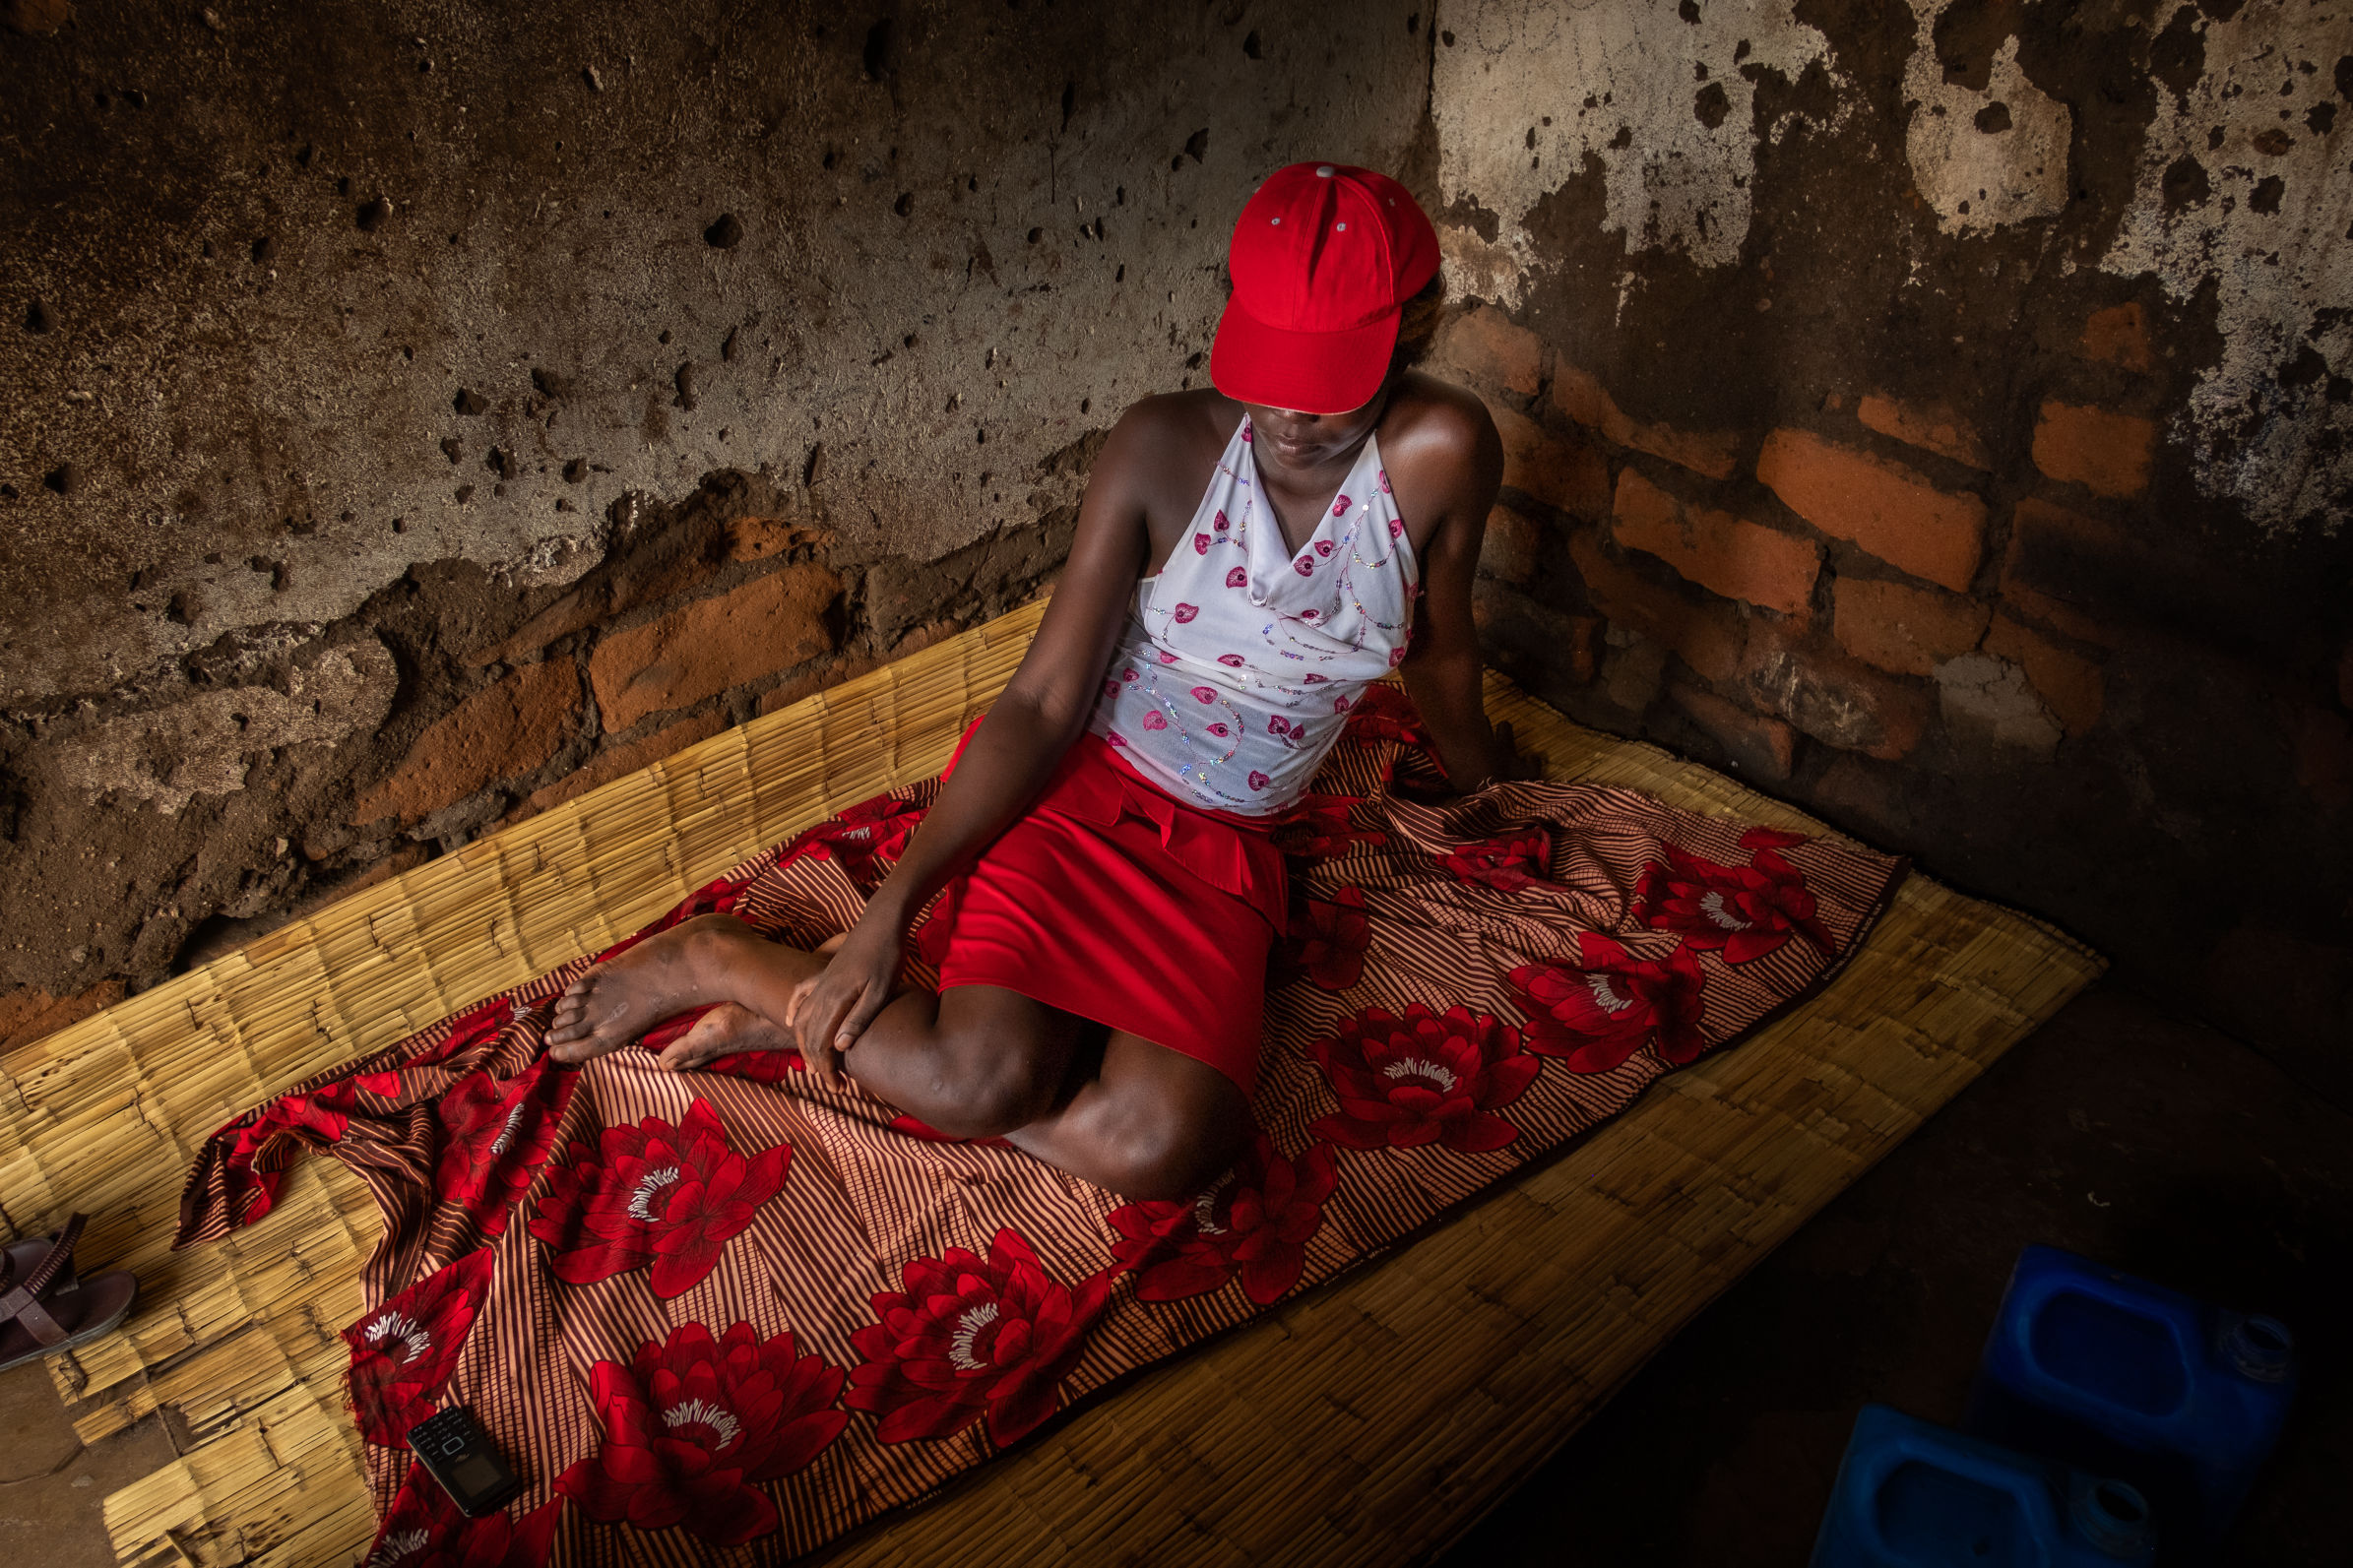 A sex worker on grass mat in a rented room where she lives that is also used for clients in a compound in Nsanje, Malawi. Photo by Isabel Corthier/MSF.